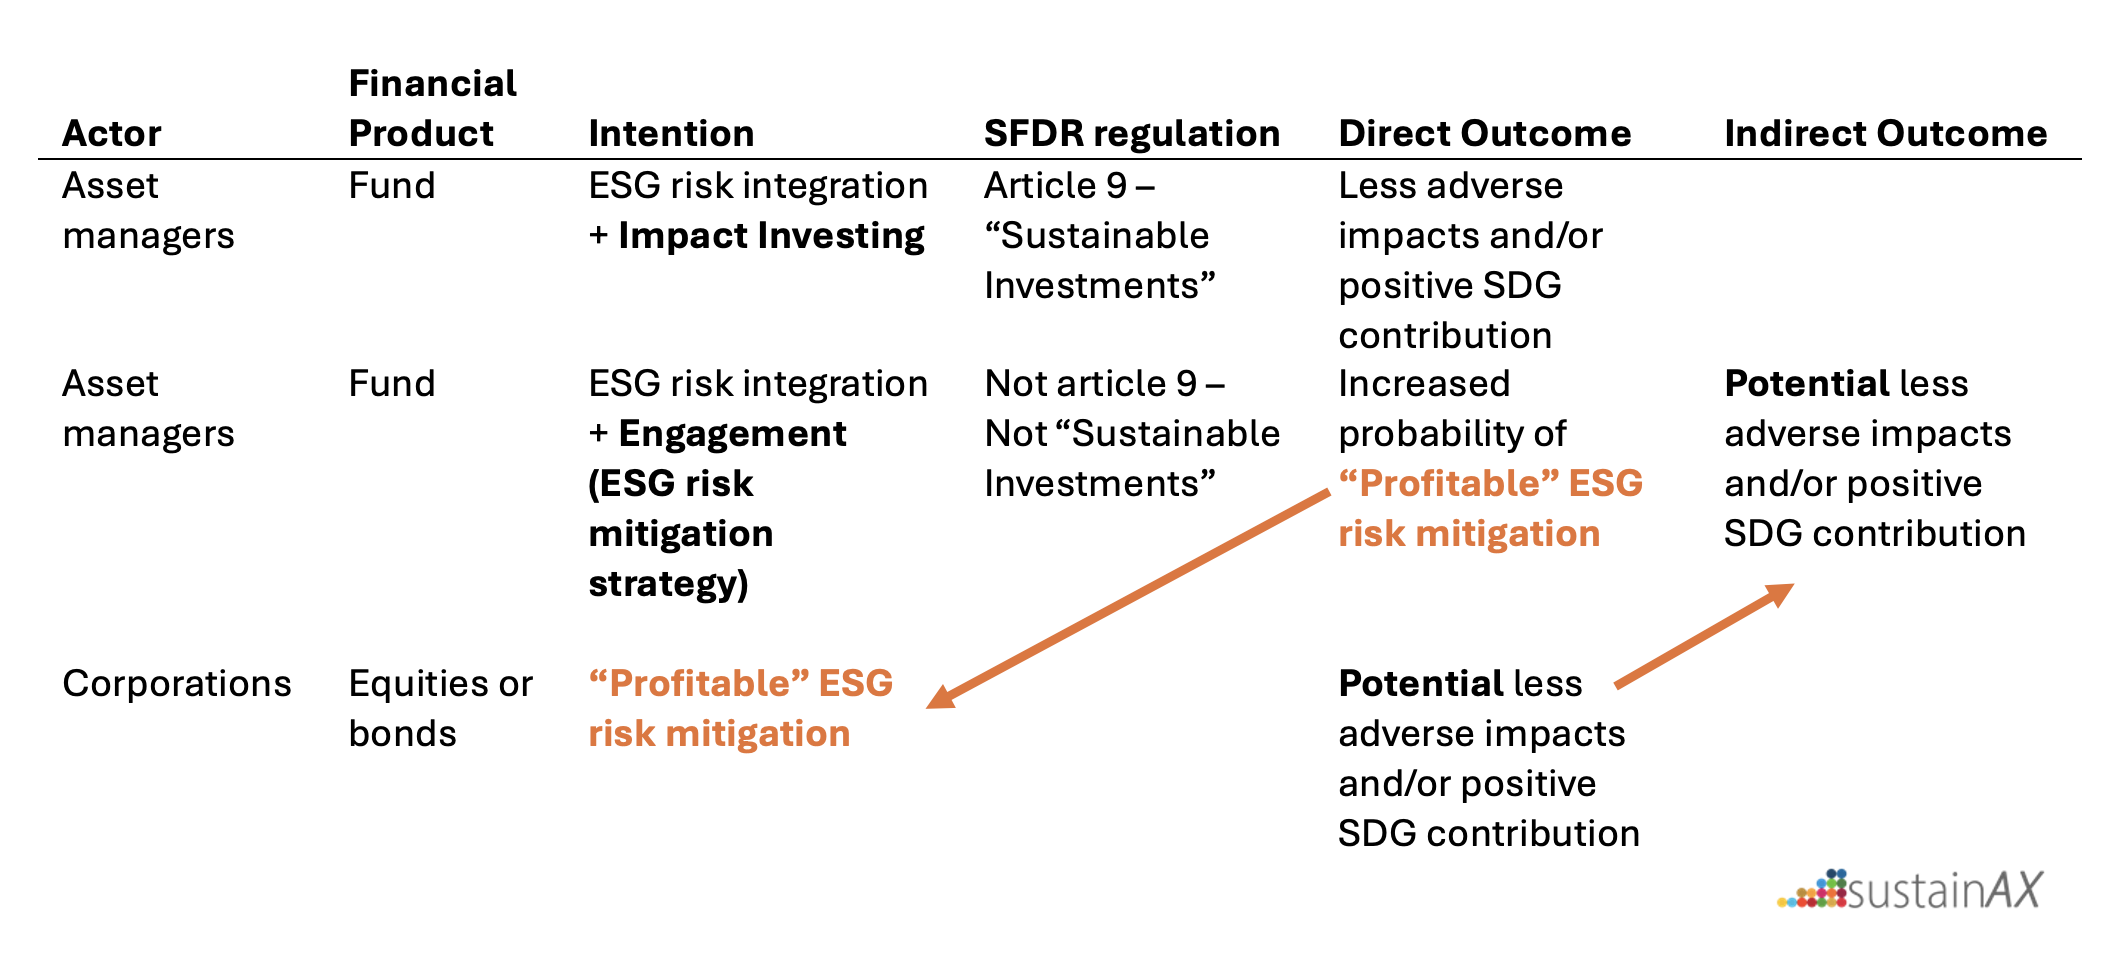 Intention and outcome for impact investing and ESG risk integration